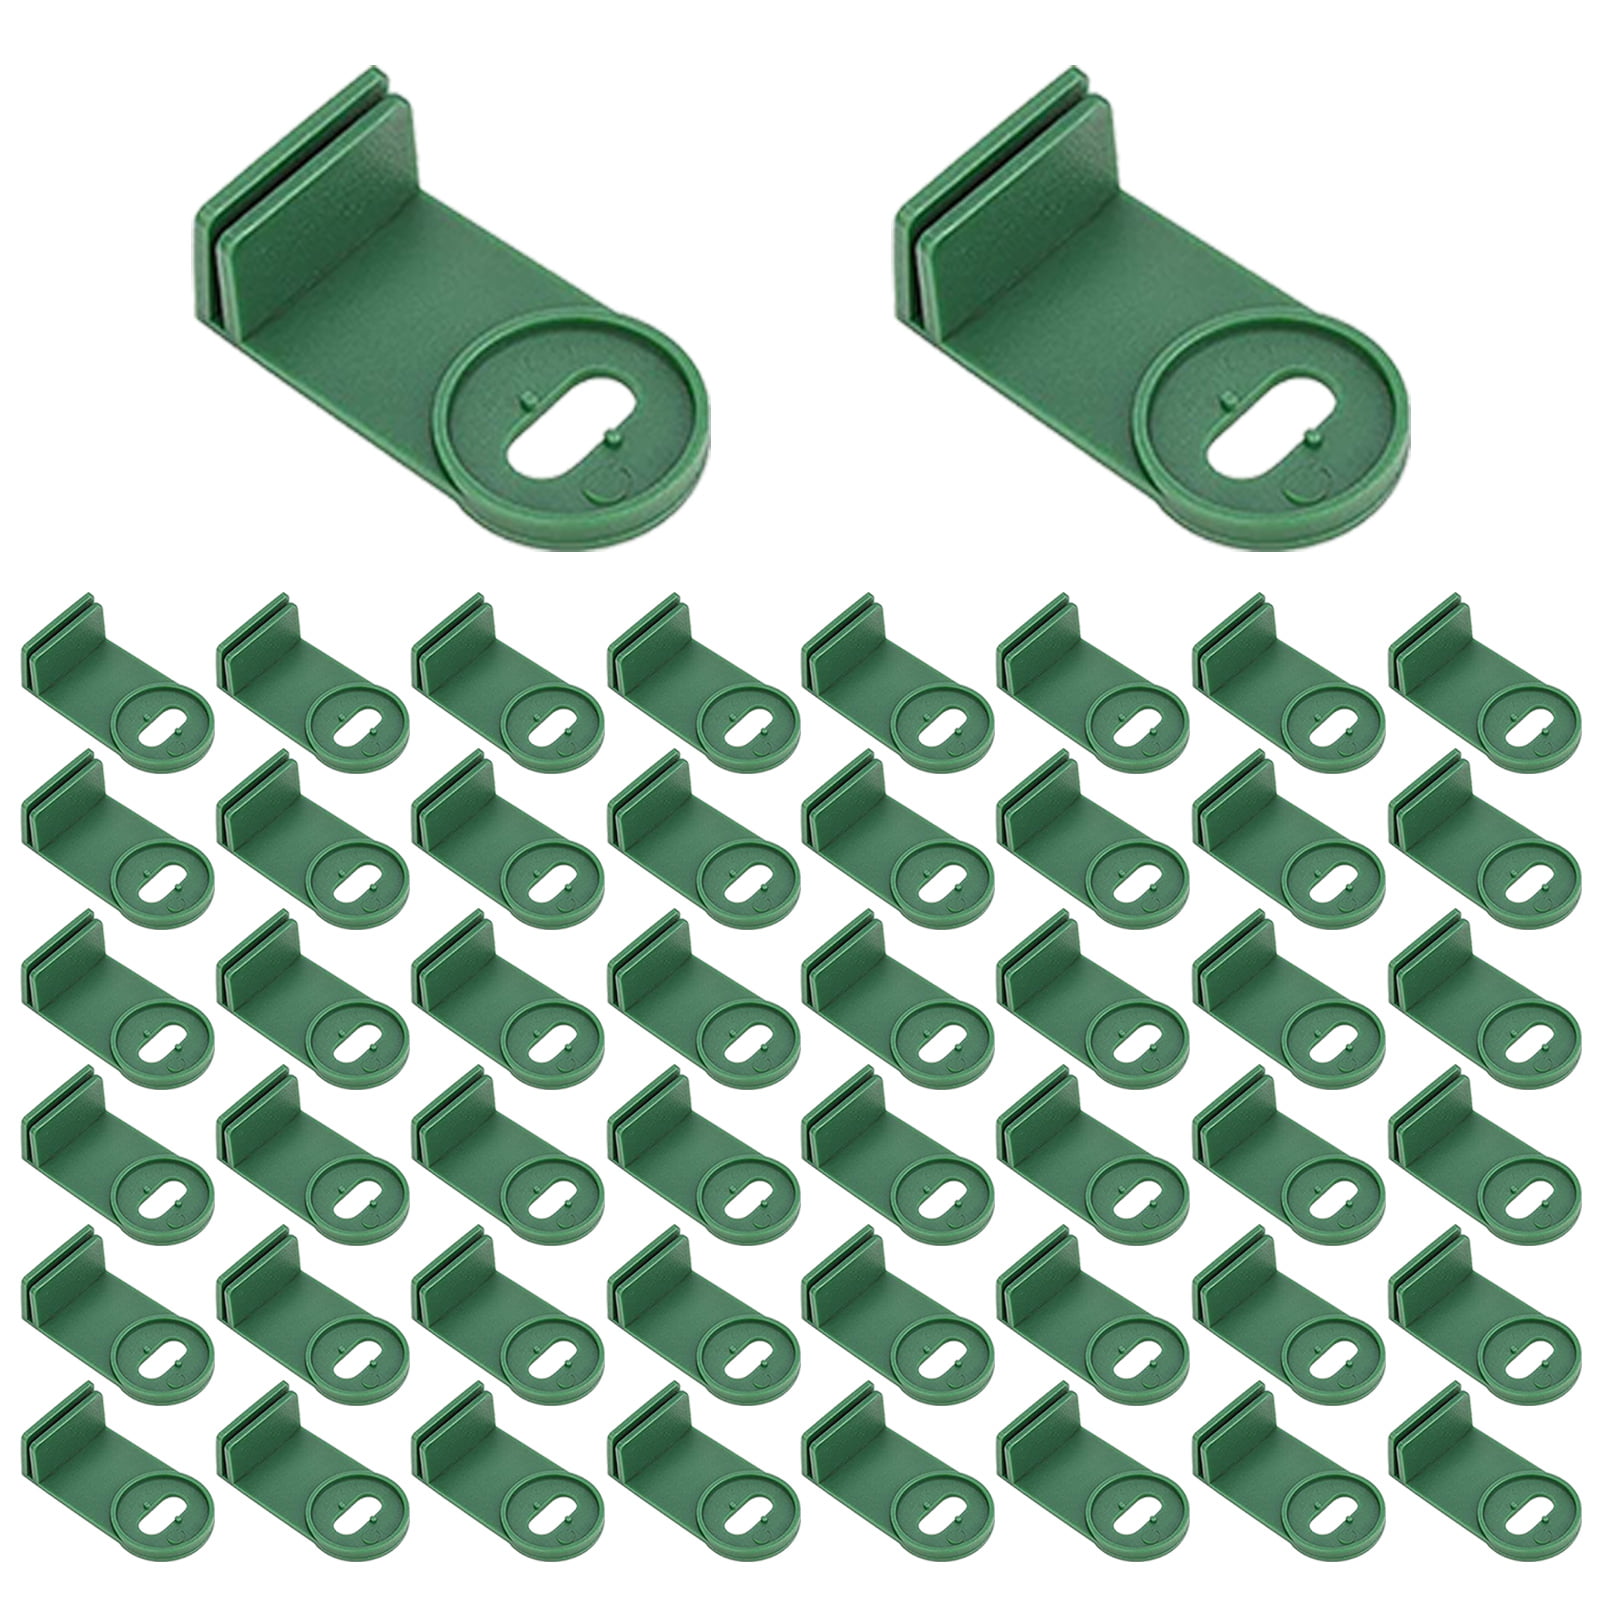 20 GREENHOUSE GLASS ALUMINIUM SQUARE HEAD NUTS AND BOLTS 11mm LENGTH COLDFRAME 